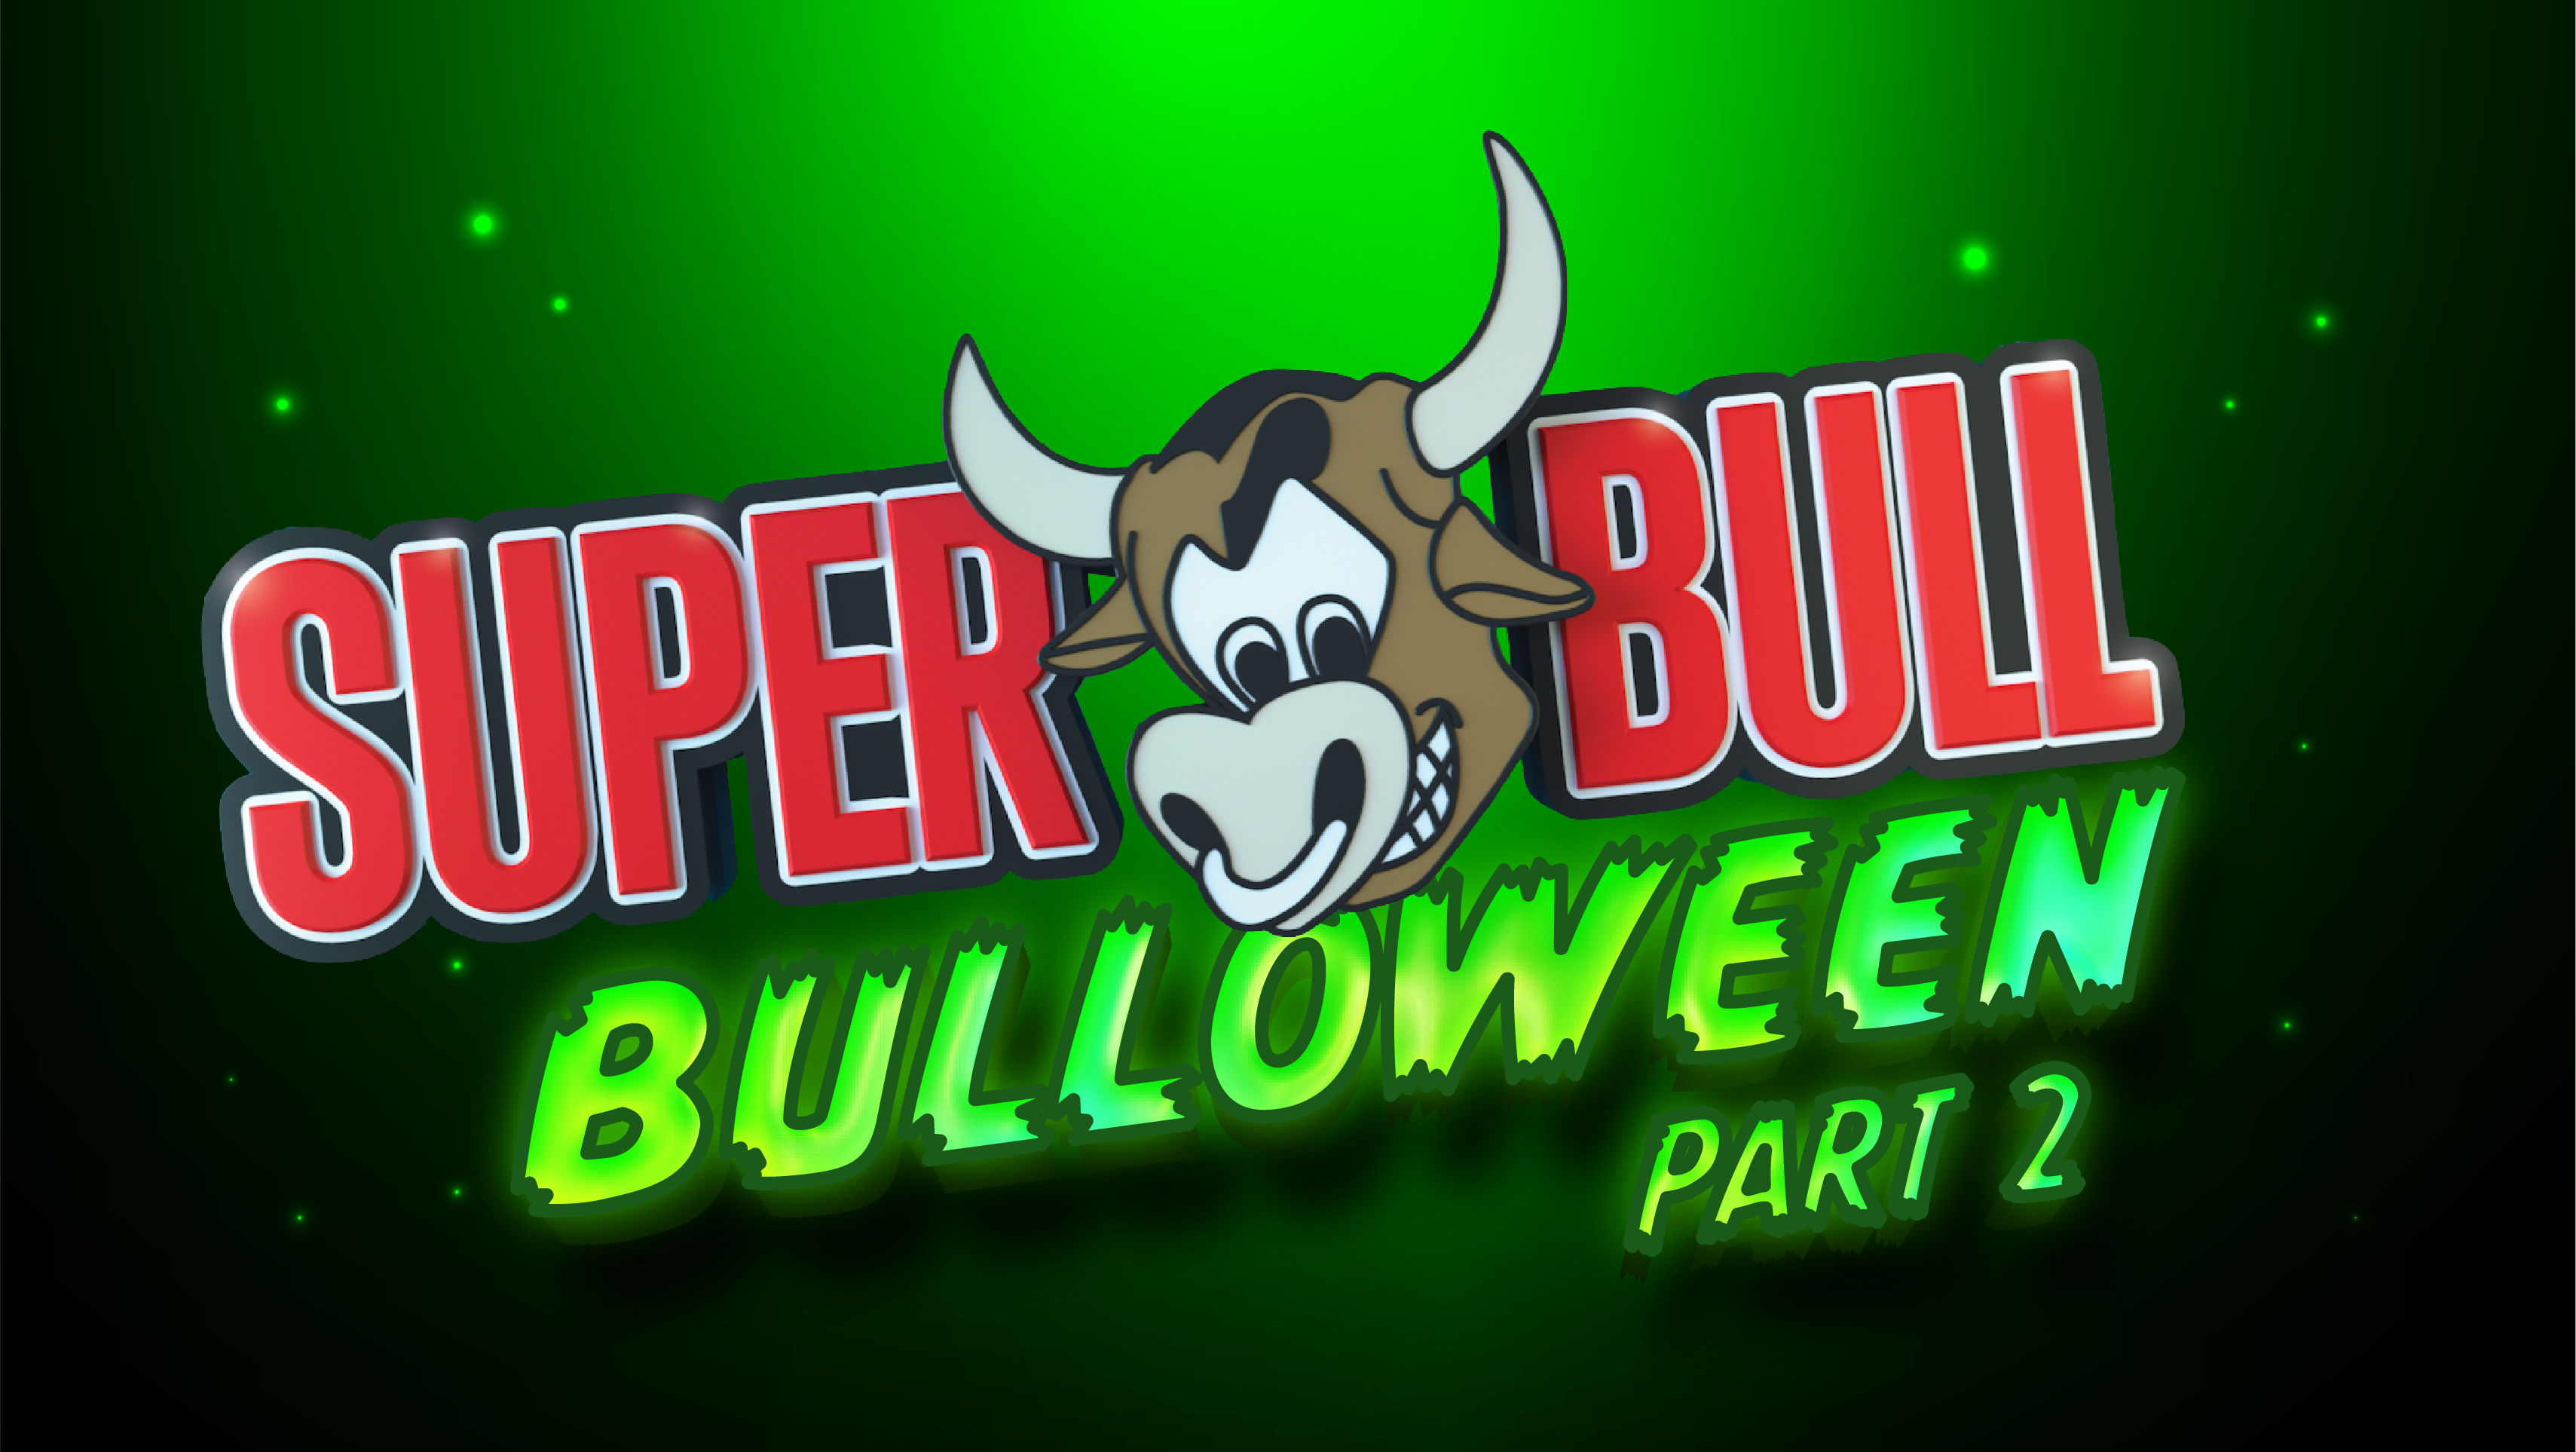 THE SUPERBULL – SOLD OUT –  BULLOWEEN PART 2 (2 FLOORS) – TUES 31ST OCT